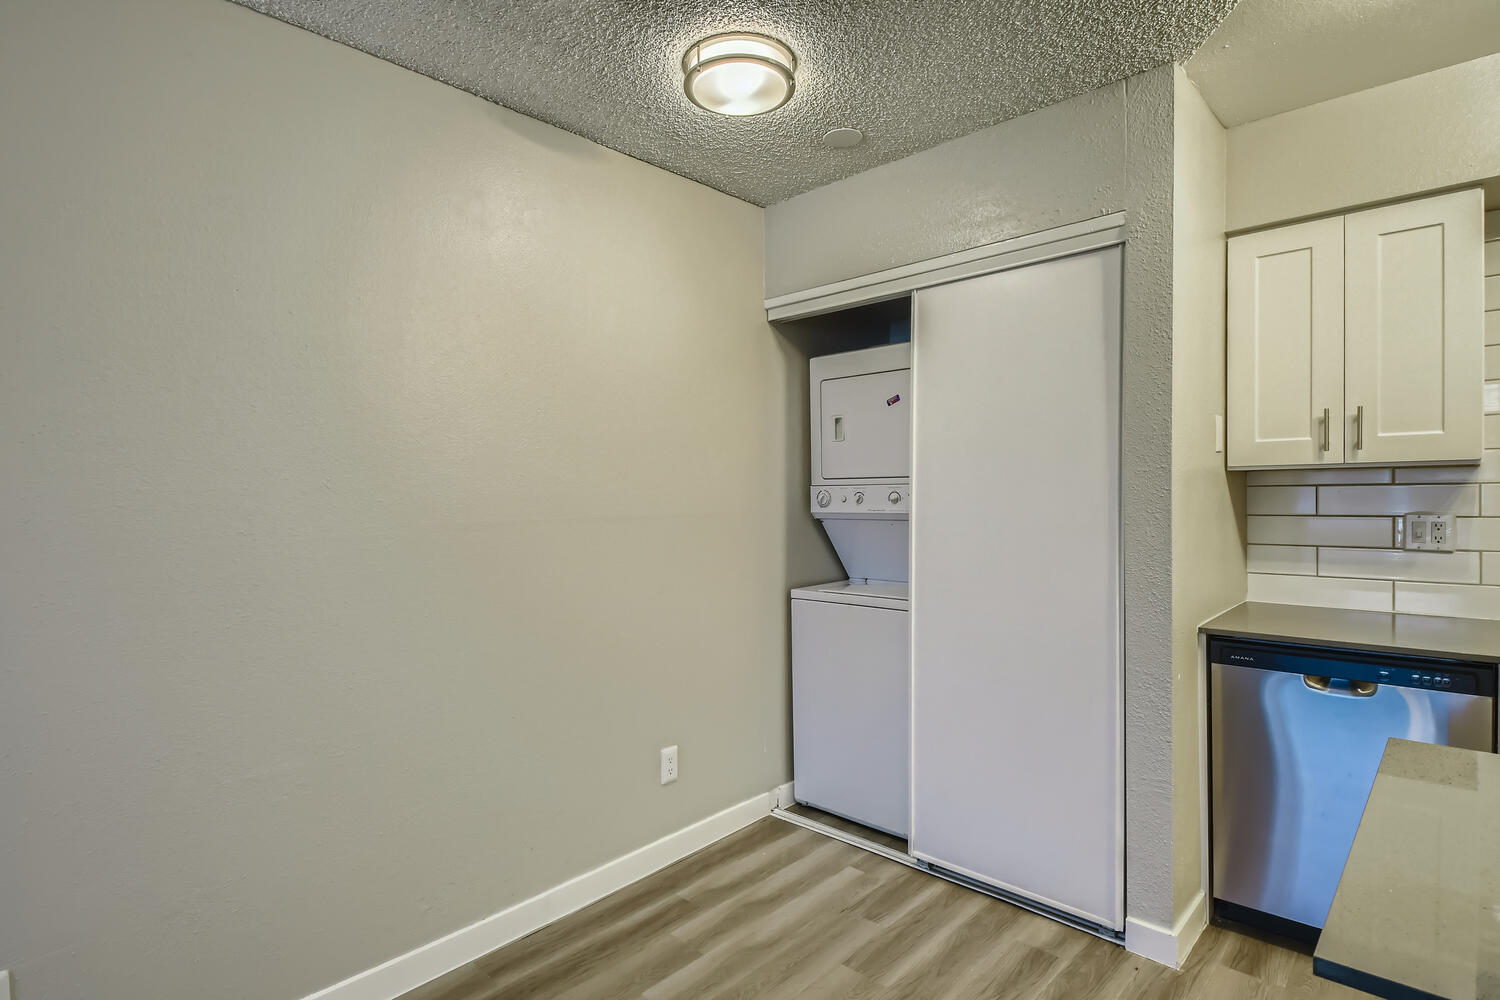 The dining area with a washer and dryer in a closet at Rise North Ridge.